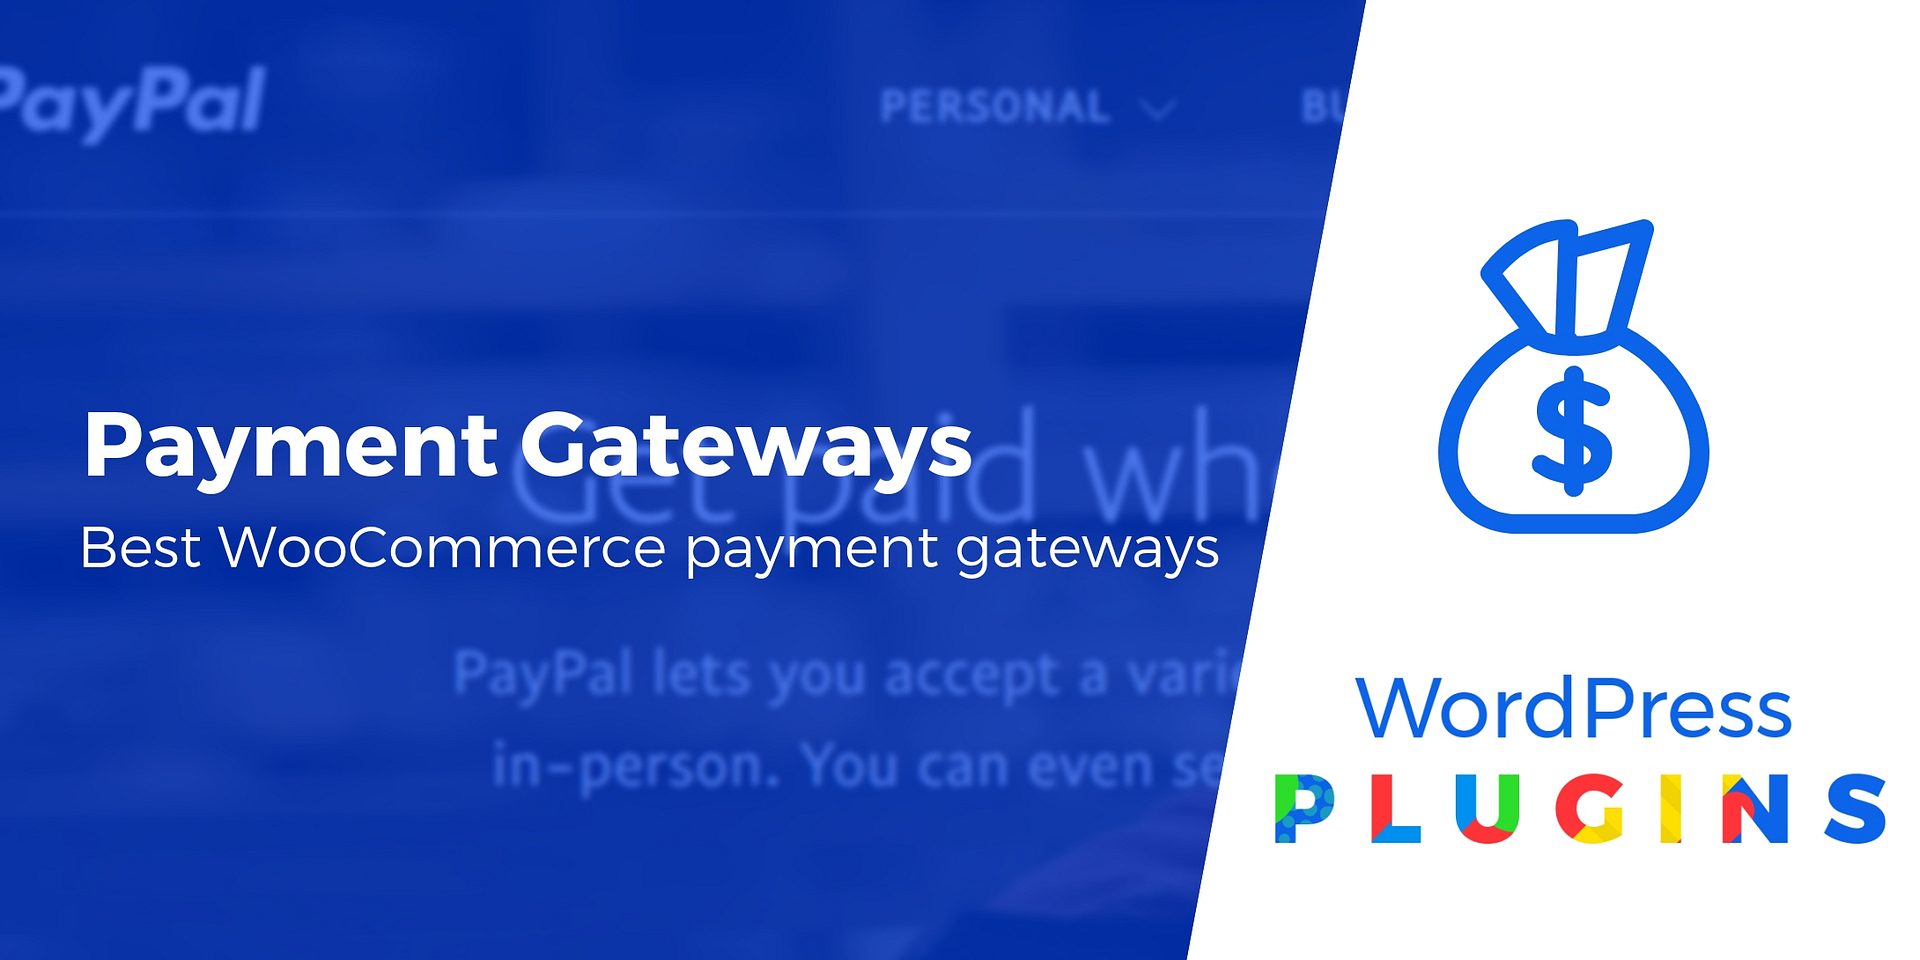 Best Payment Gateway For Woocommerce 5 Options Compared